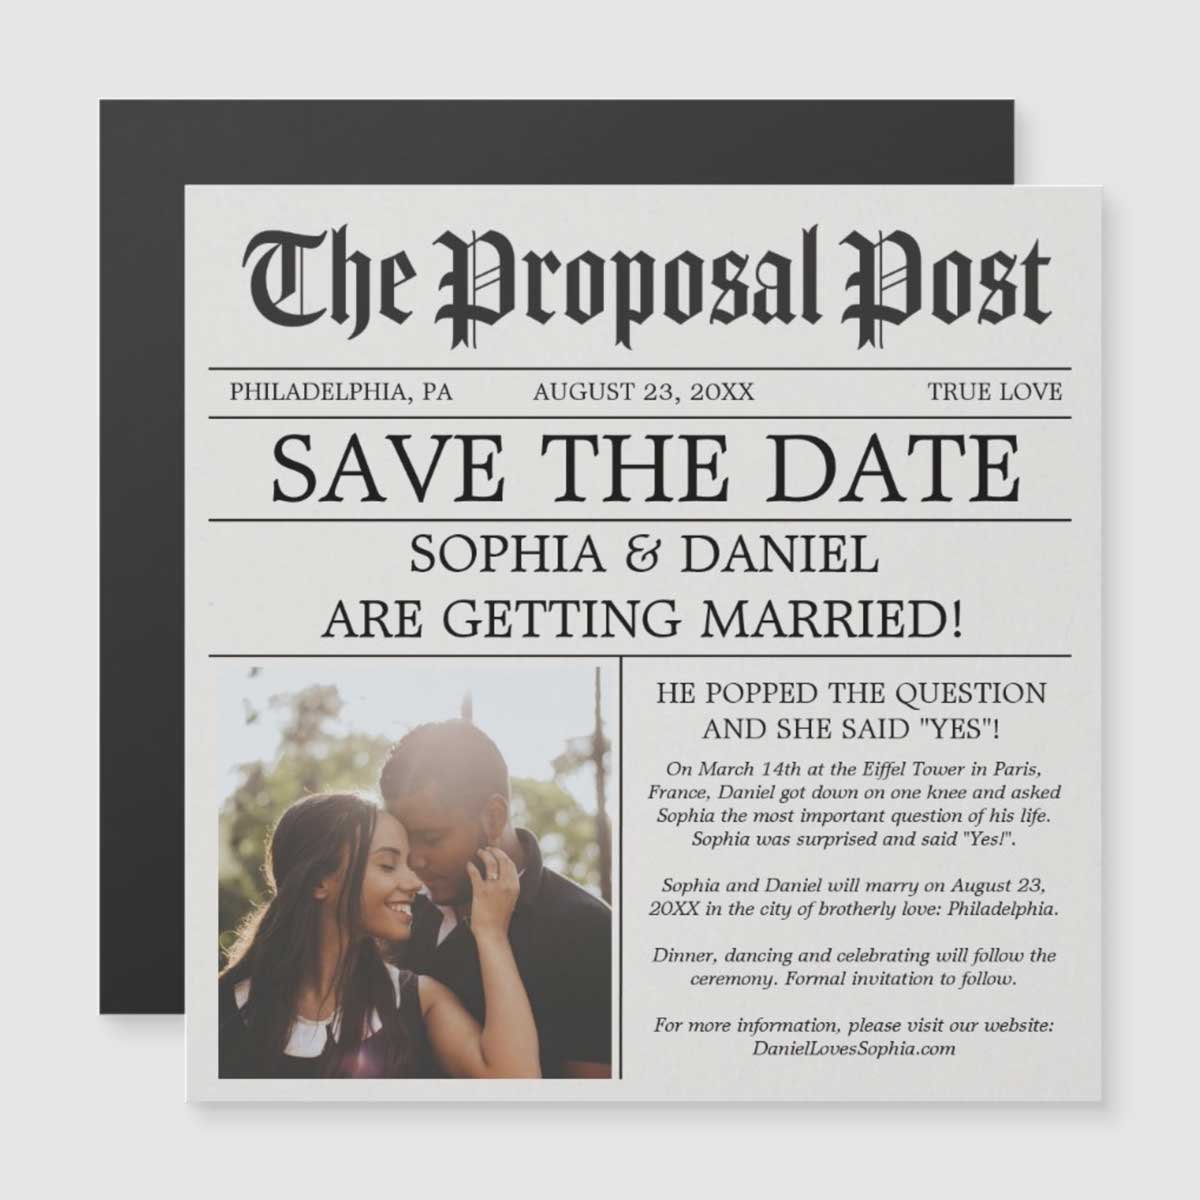 Save the Date Newspaper